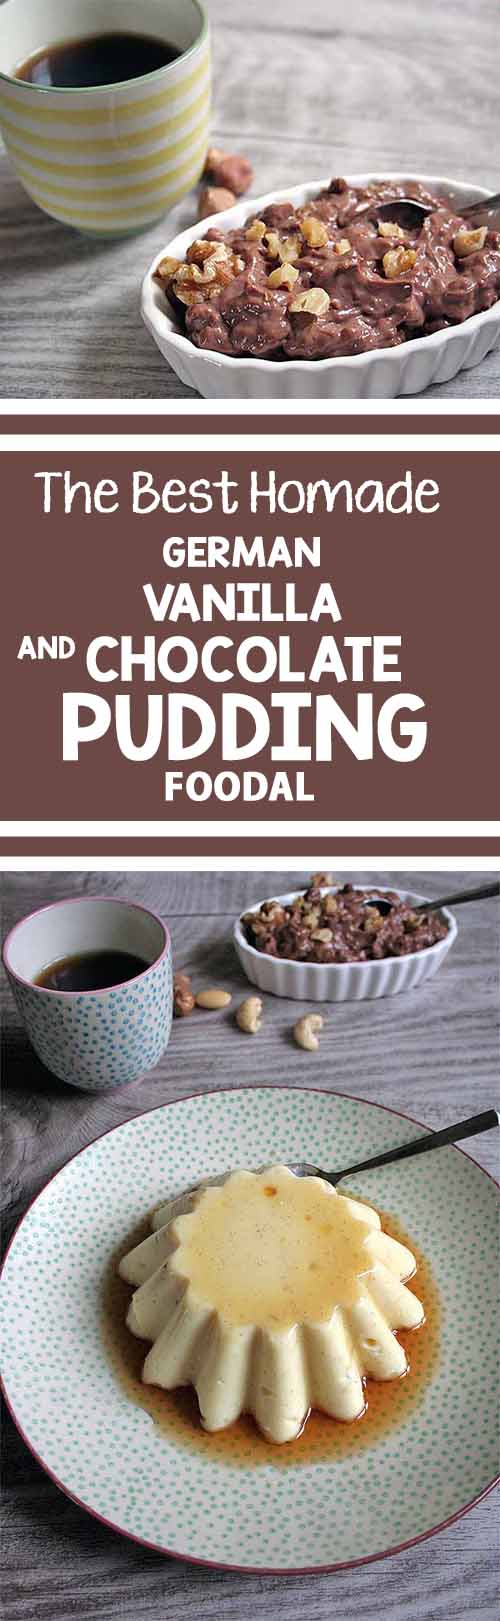 What could be better than a creamy, real vanilla or chocolate flavored milk pudding on a rainy day in the fall? Whether warm and soft or cold and firm, enjoy this delicious homemade dessert whenever you’re craving some sweet comfort food. Read on and indulge in this special treat today! Get the recipe here: https://foodal.com/recipes/desserts/german-vanilla-and-chocolate-pudding/